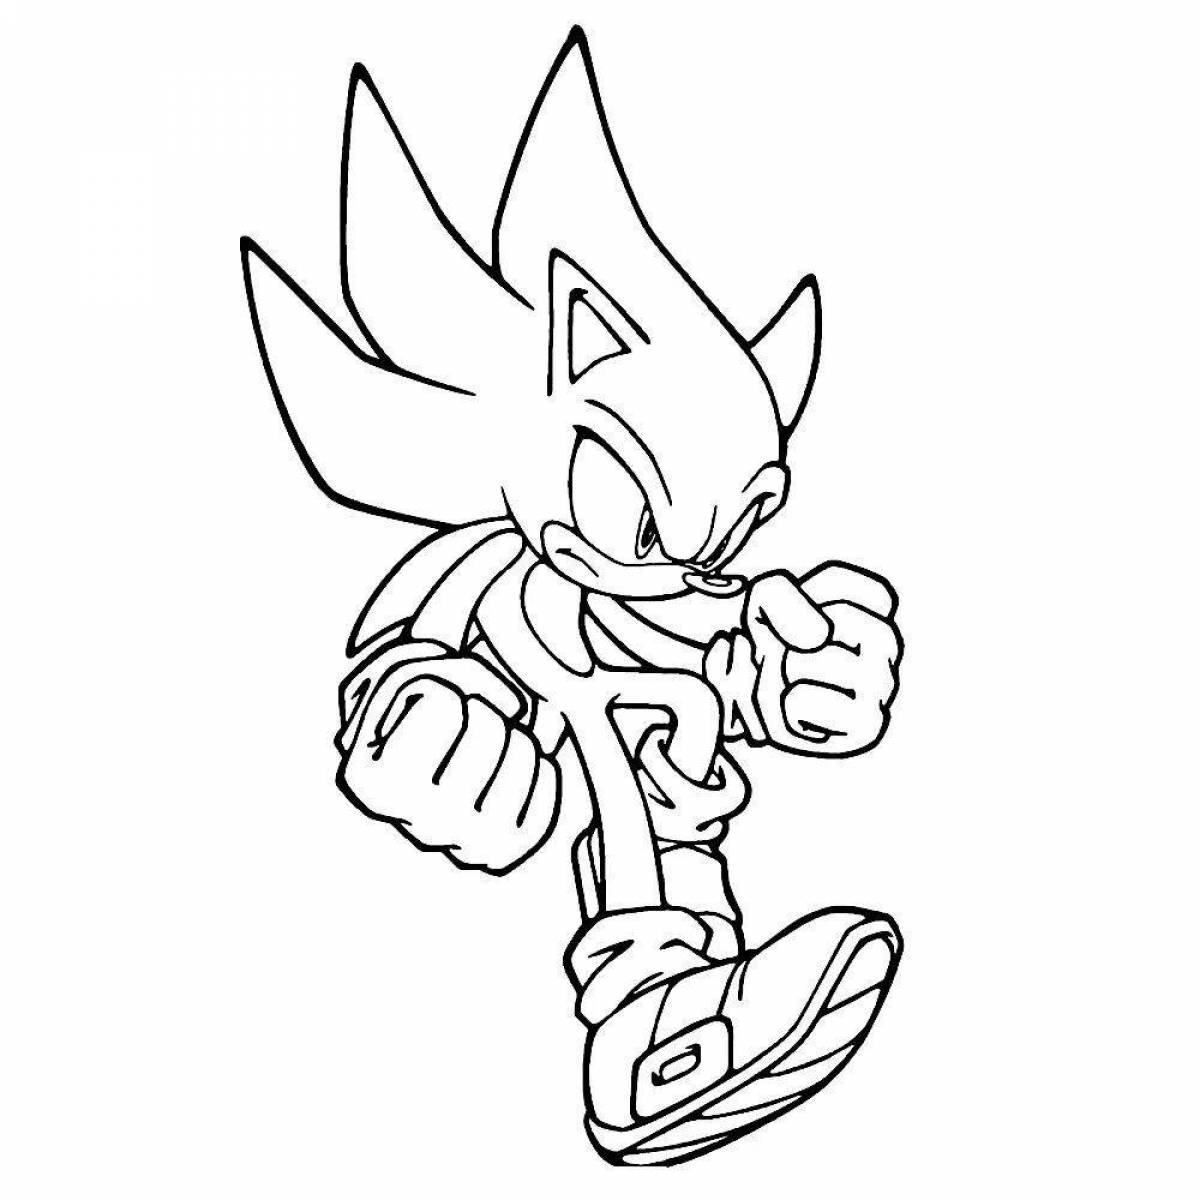 Exquisite sonic egzy coloring book